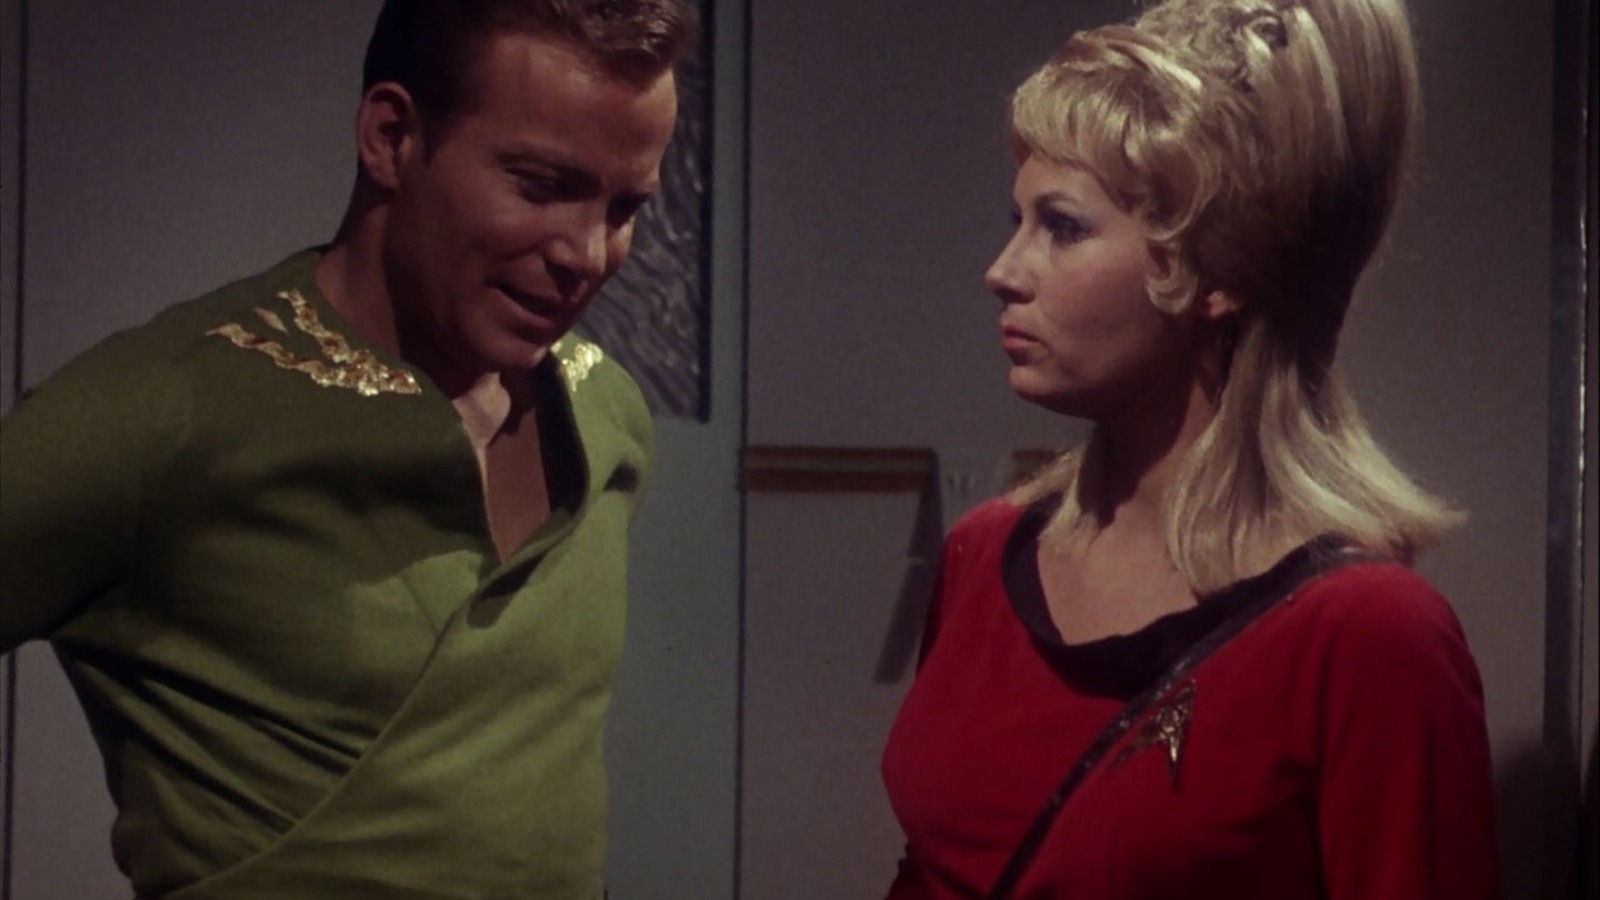 A Tough Episode In Star Trek: The Original Series Left Grace Lee Whitney ‘Black And Blue’